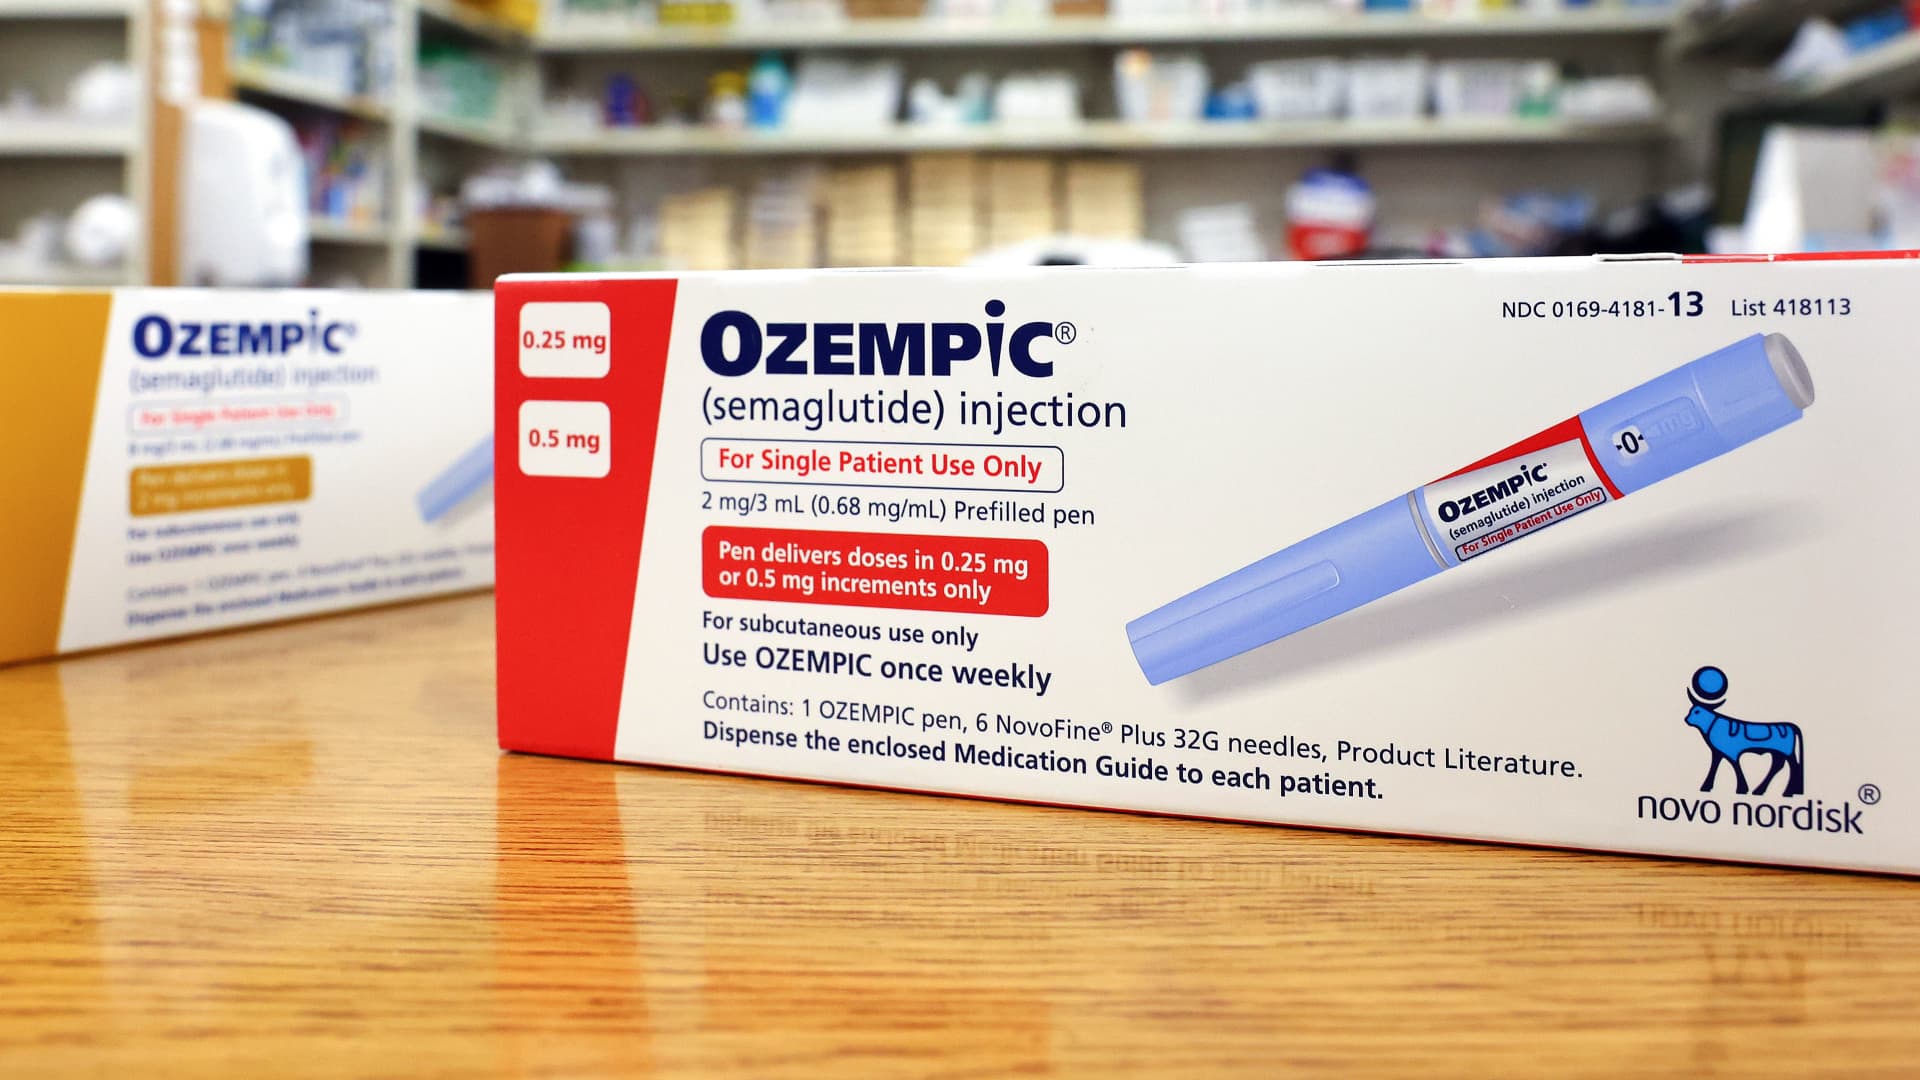 EU expands Wegovy, Ozempic probe over suicide risks to include other weight loss, diabetes drugs